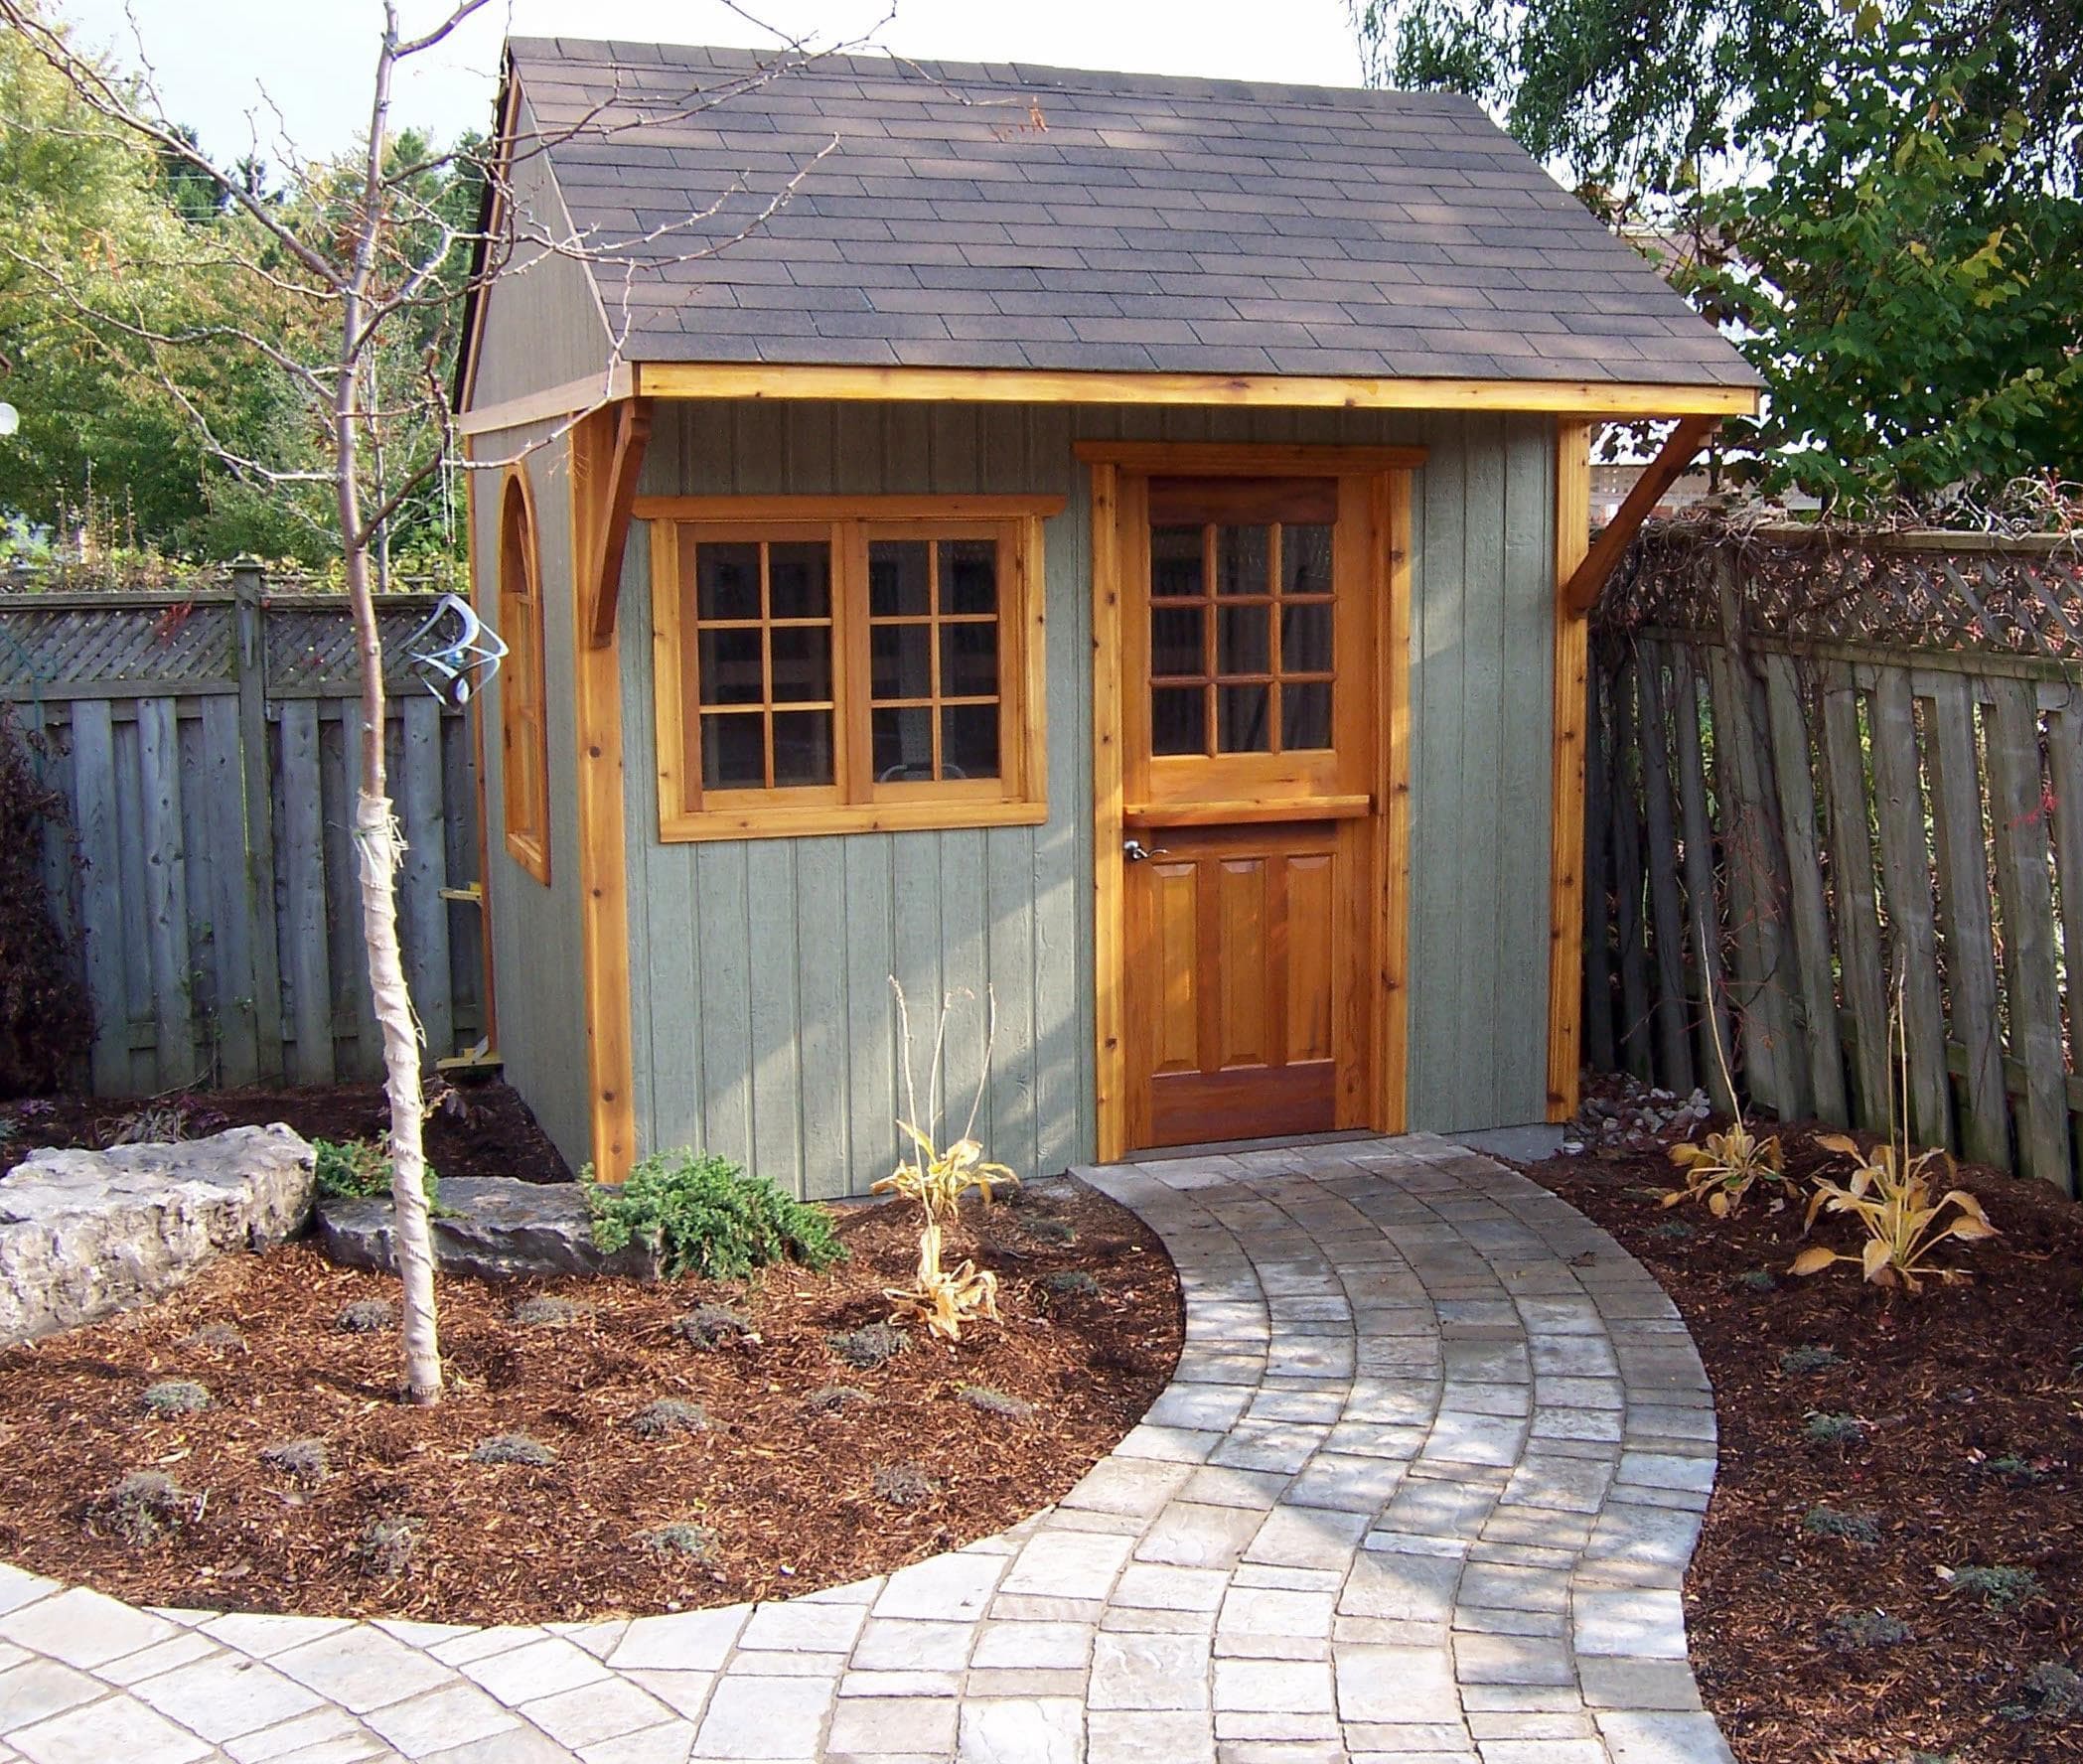 Canexel Glen Echo Garden Shed with bar window in Toronto Ontario. ID number 185988-2